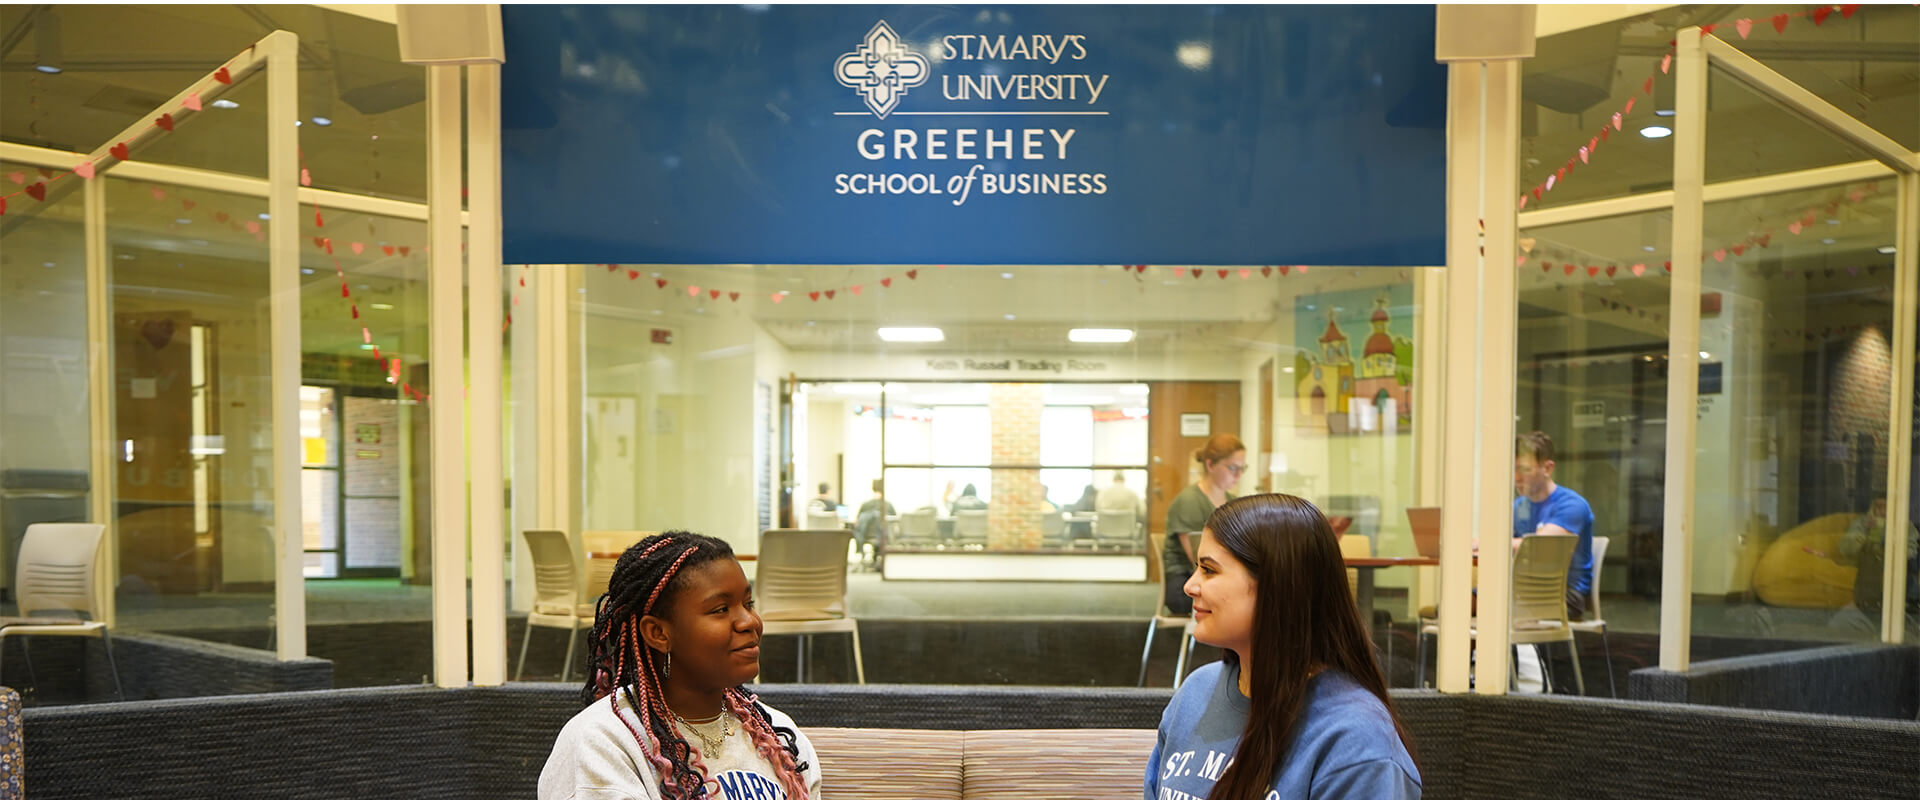 Dede Fioklou-Toulan and Belyn Thompson have their monthly meeting at the Greehey School of Business.